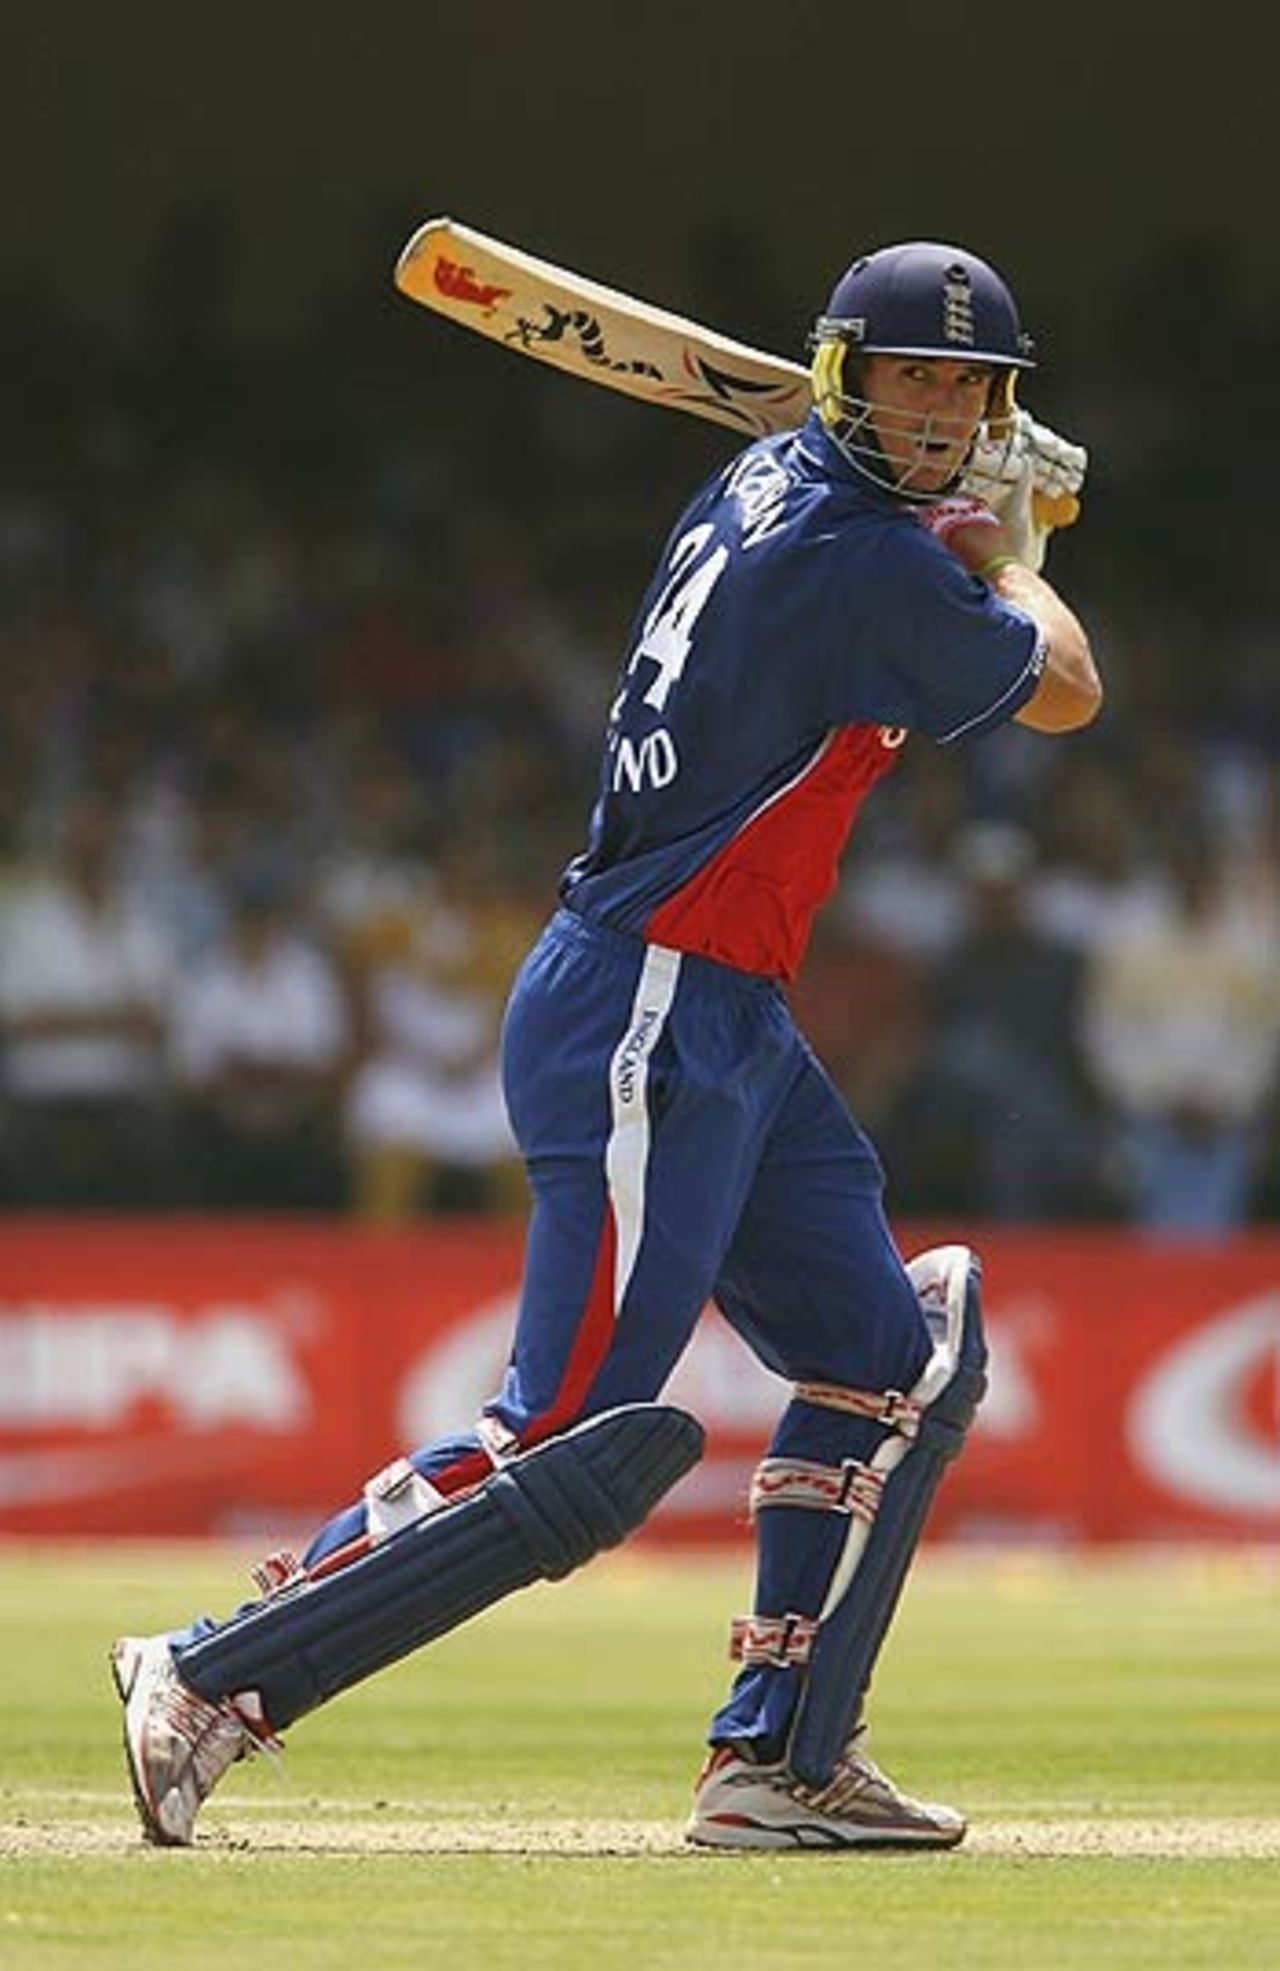 Kevin Pietersen cuts loose with a boundary on the off side, India v England, 7th ODI, Indore, April 15 2006